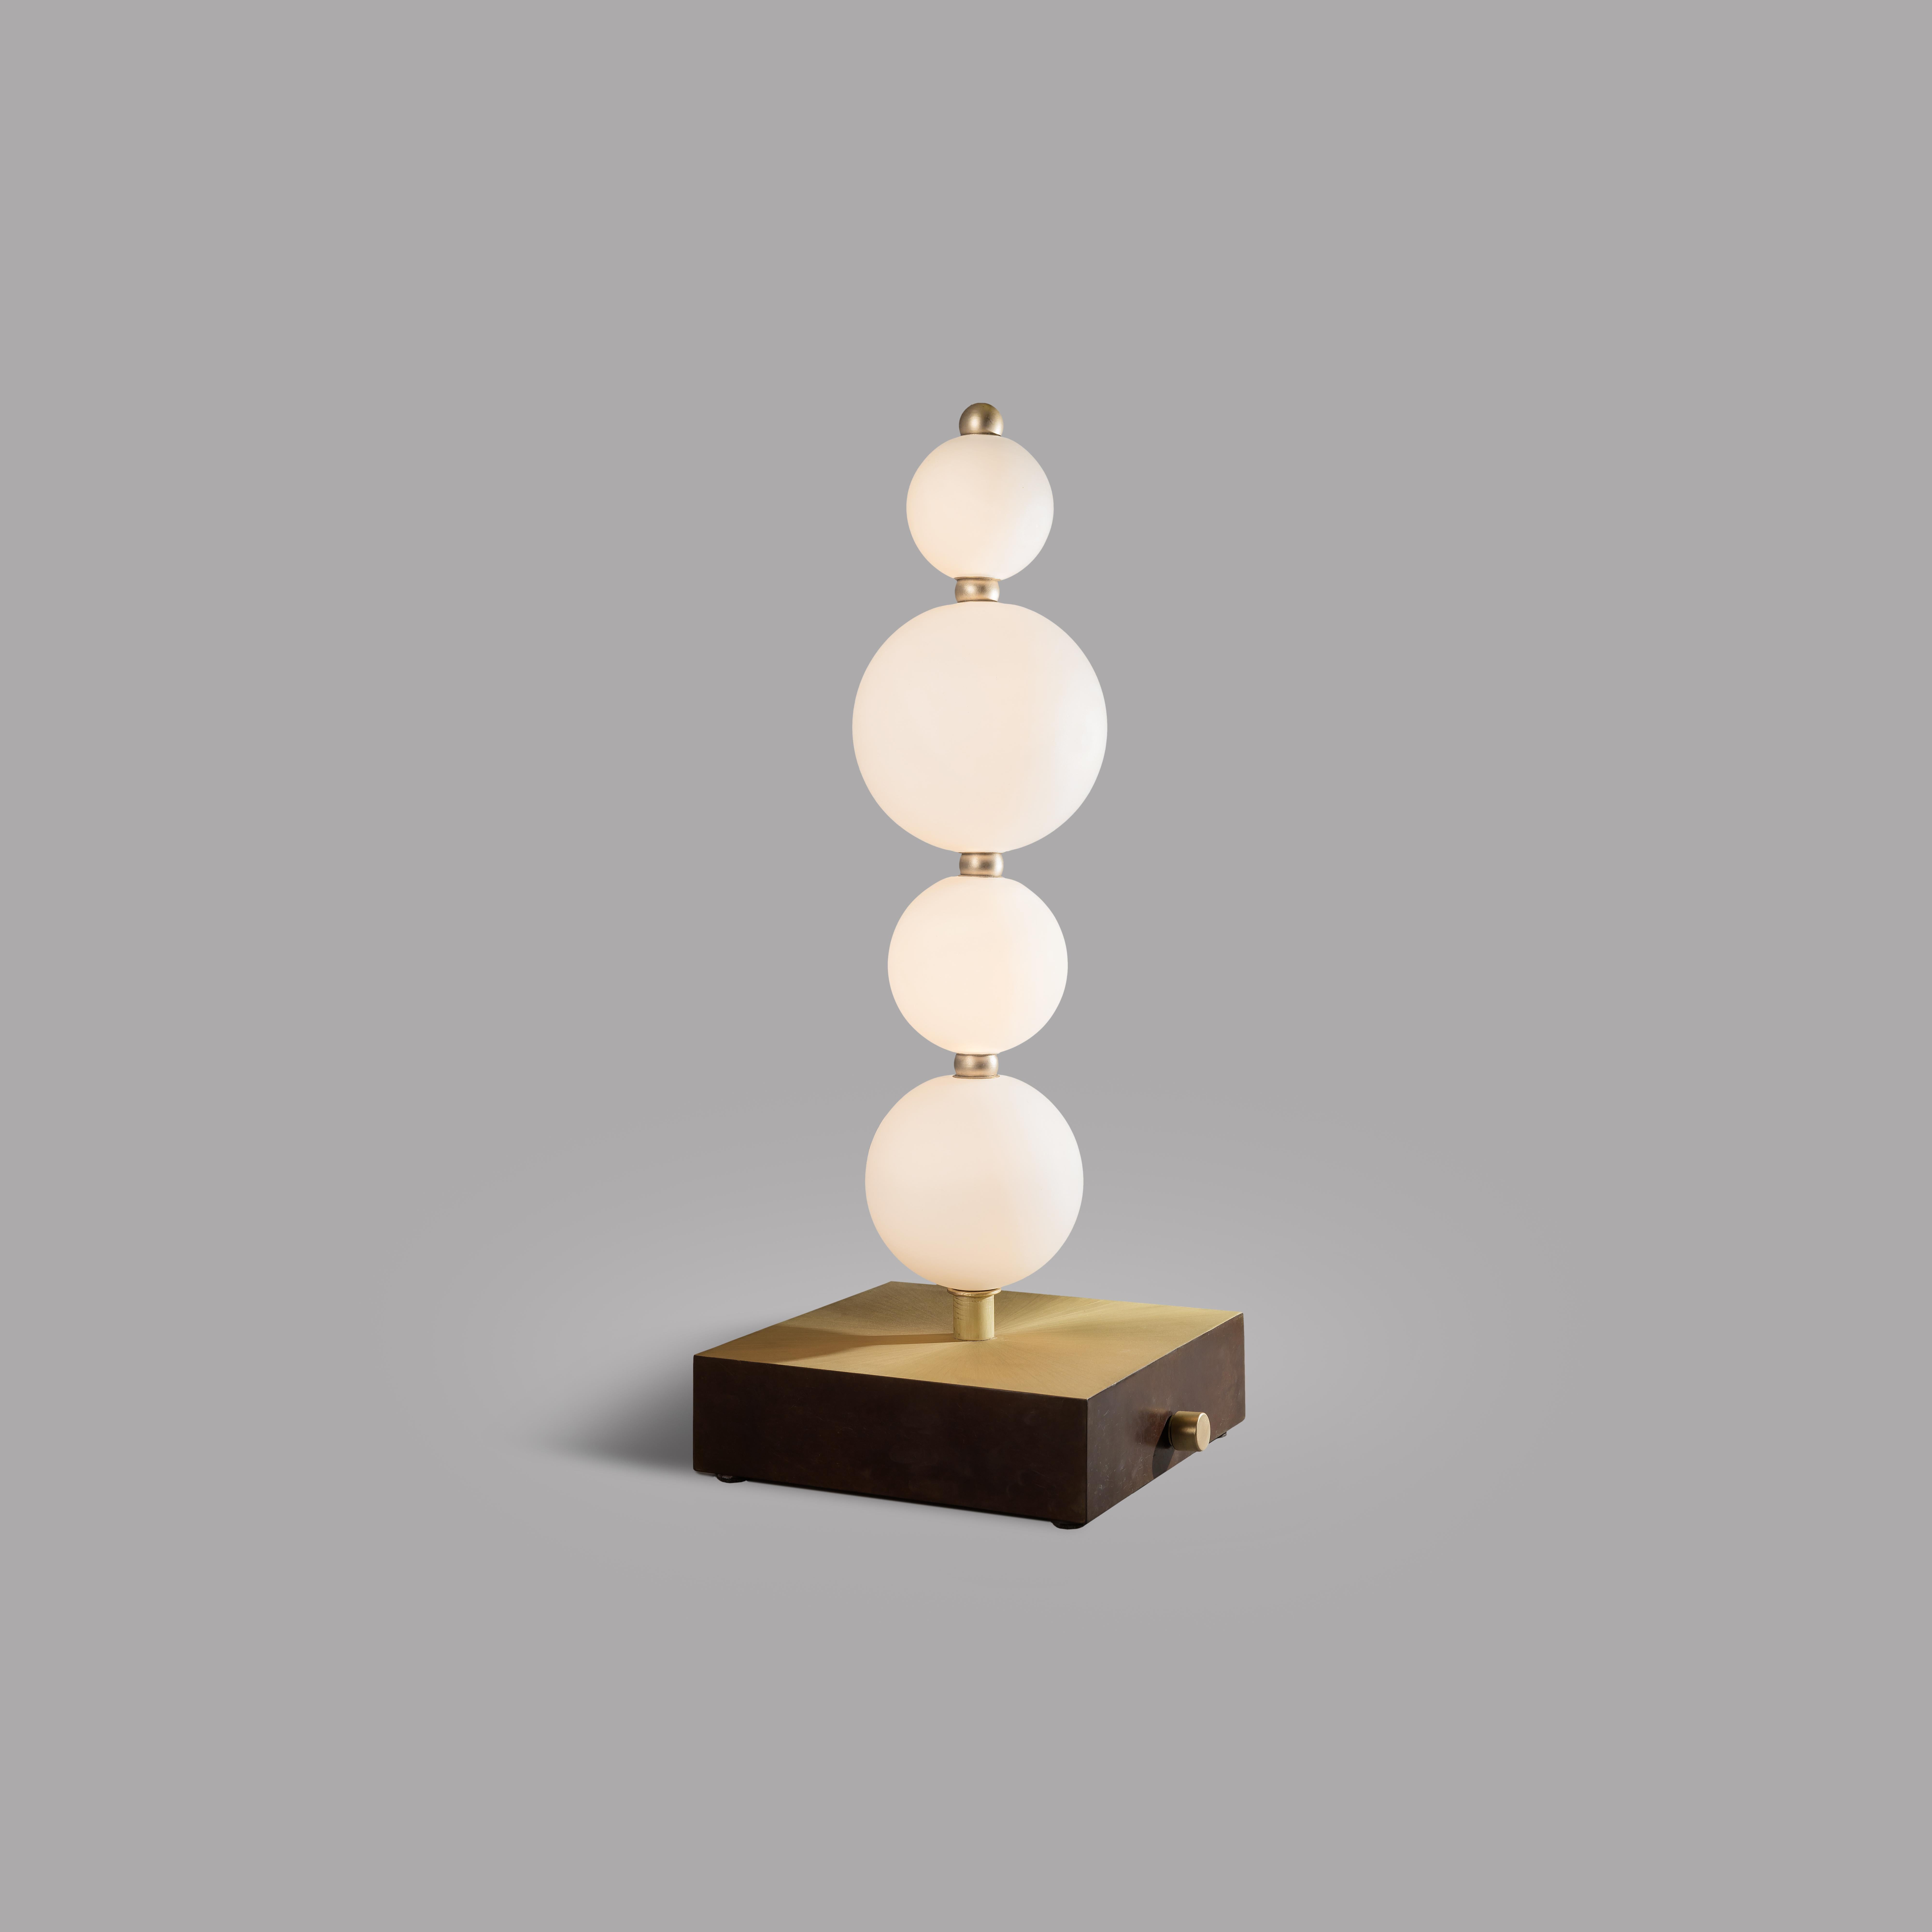 Pearl XY table lamp by Ludovic Clément d’Armont
Dimensions: D 23 x W 23 x H 58 cm
Materials: Blown glass, brass.

Ludovic Clément d’Armont is in the continuation of a family tradition of centuries of gentle glassmakers, painters, carpenters and